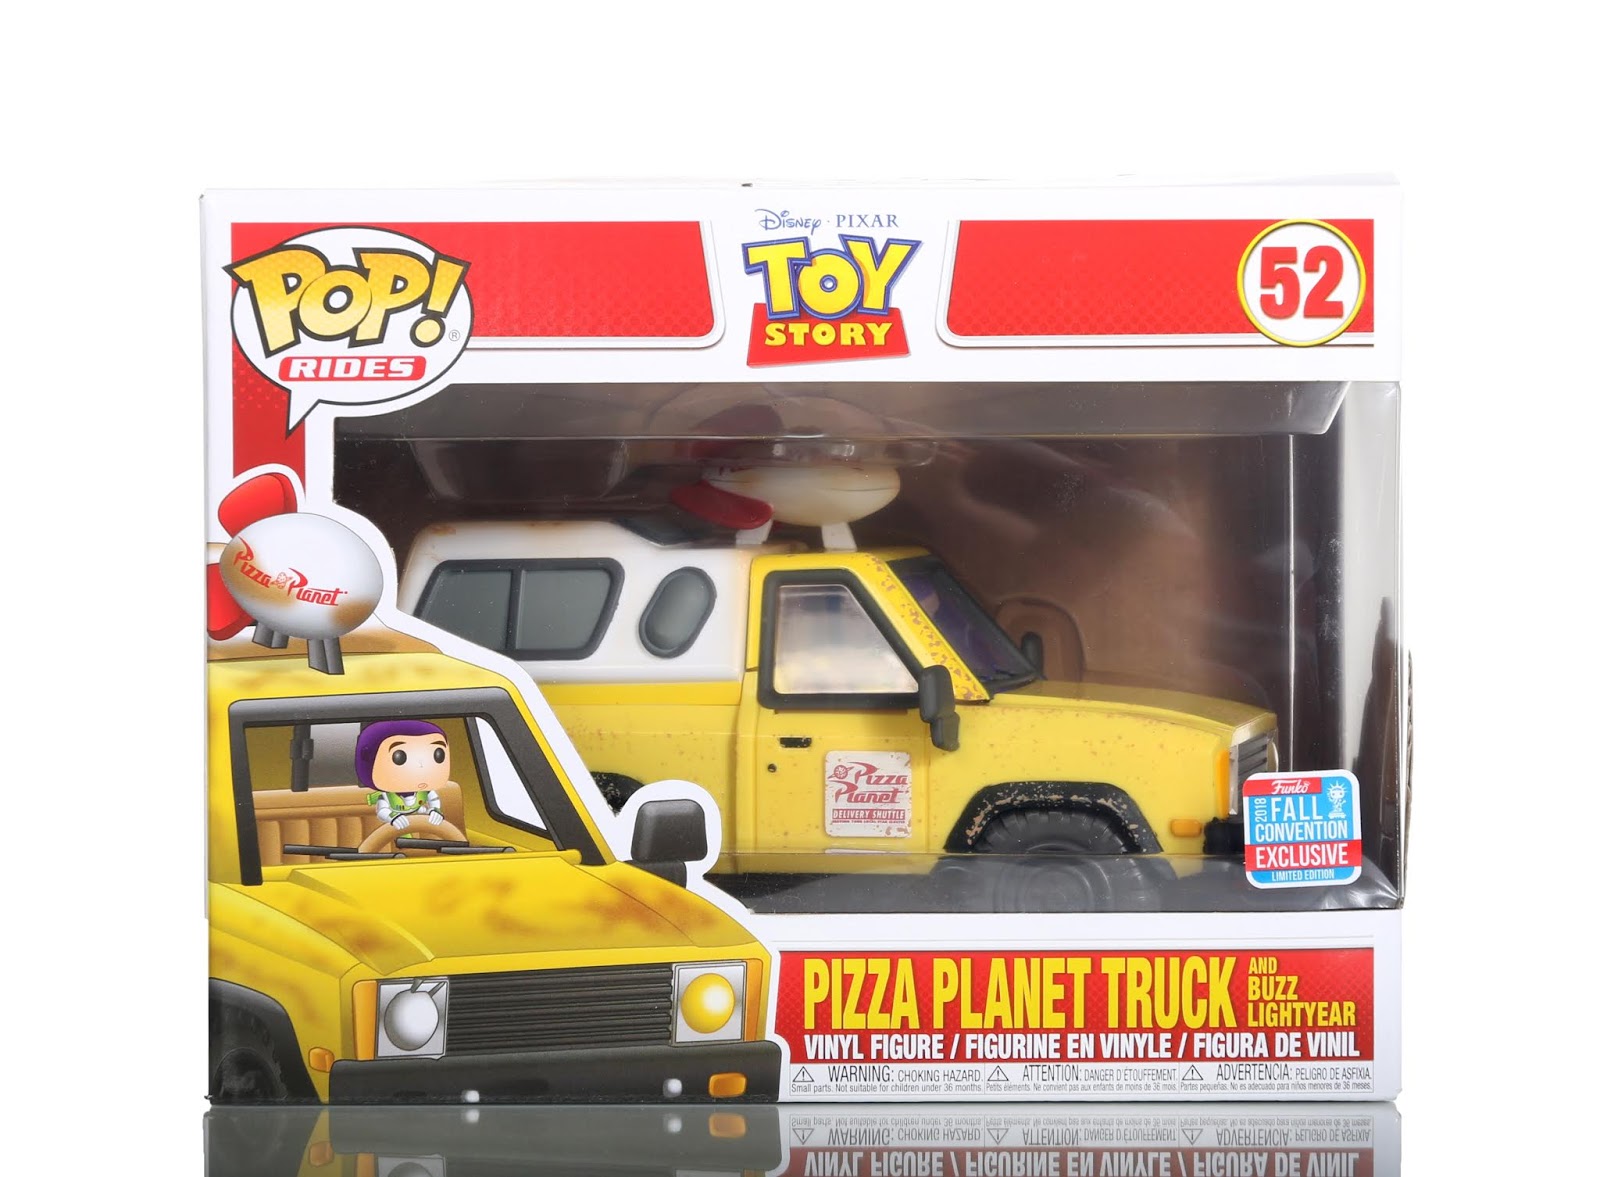 Pizza Planet Truck with Buzz Lightyear NYCC 2018 Exclusive Pop Ride Toy Story 